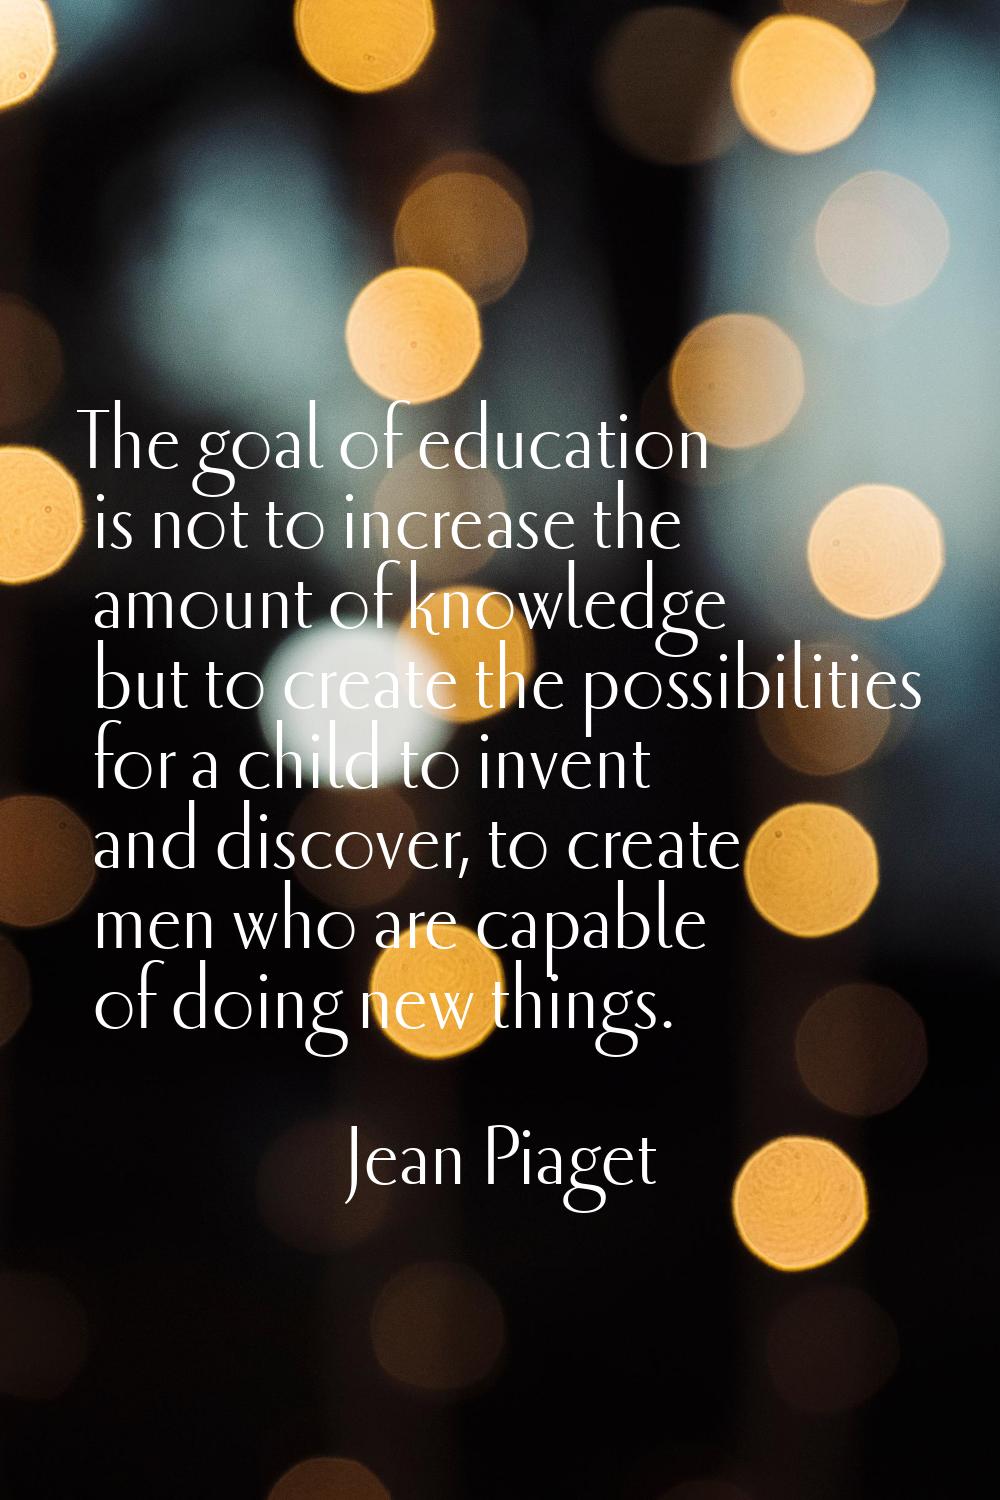 The goal of education is not to increase the amount of knowledge but to create the possibilities fo